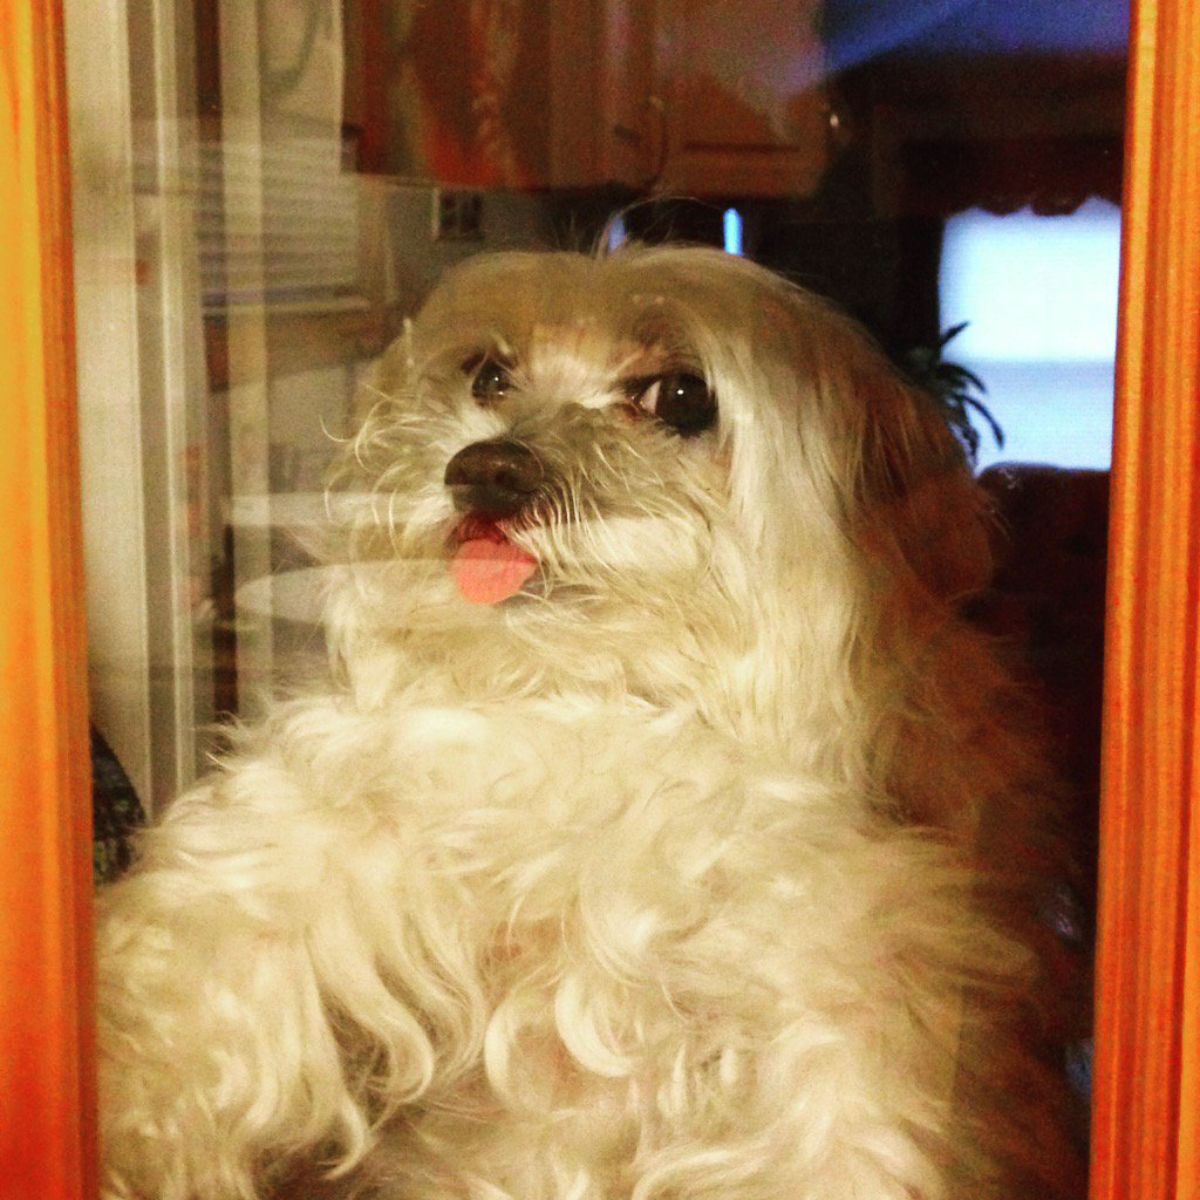 fluffy white dog behind a glass door with the tongue sticking out giving side eye